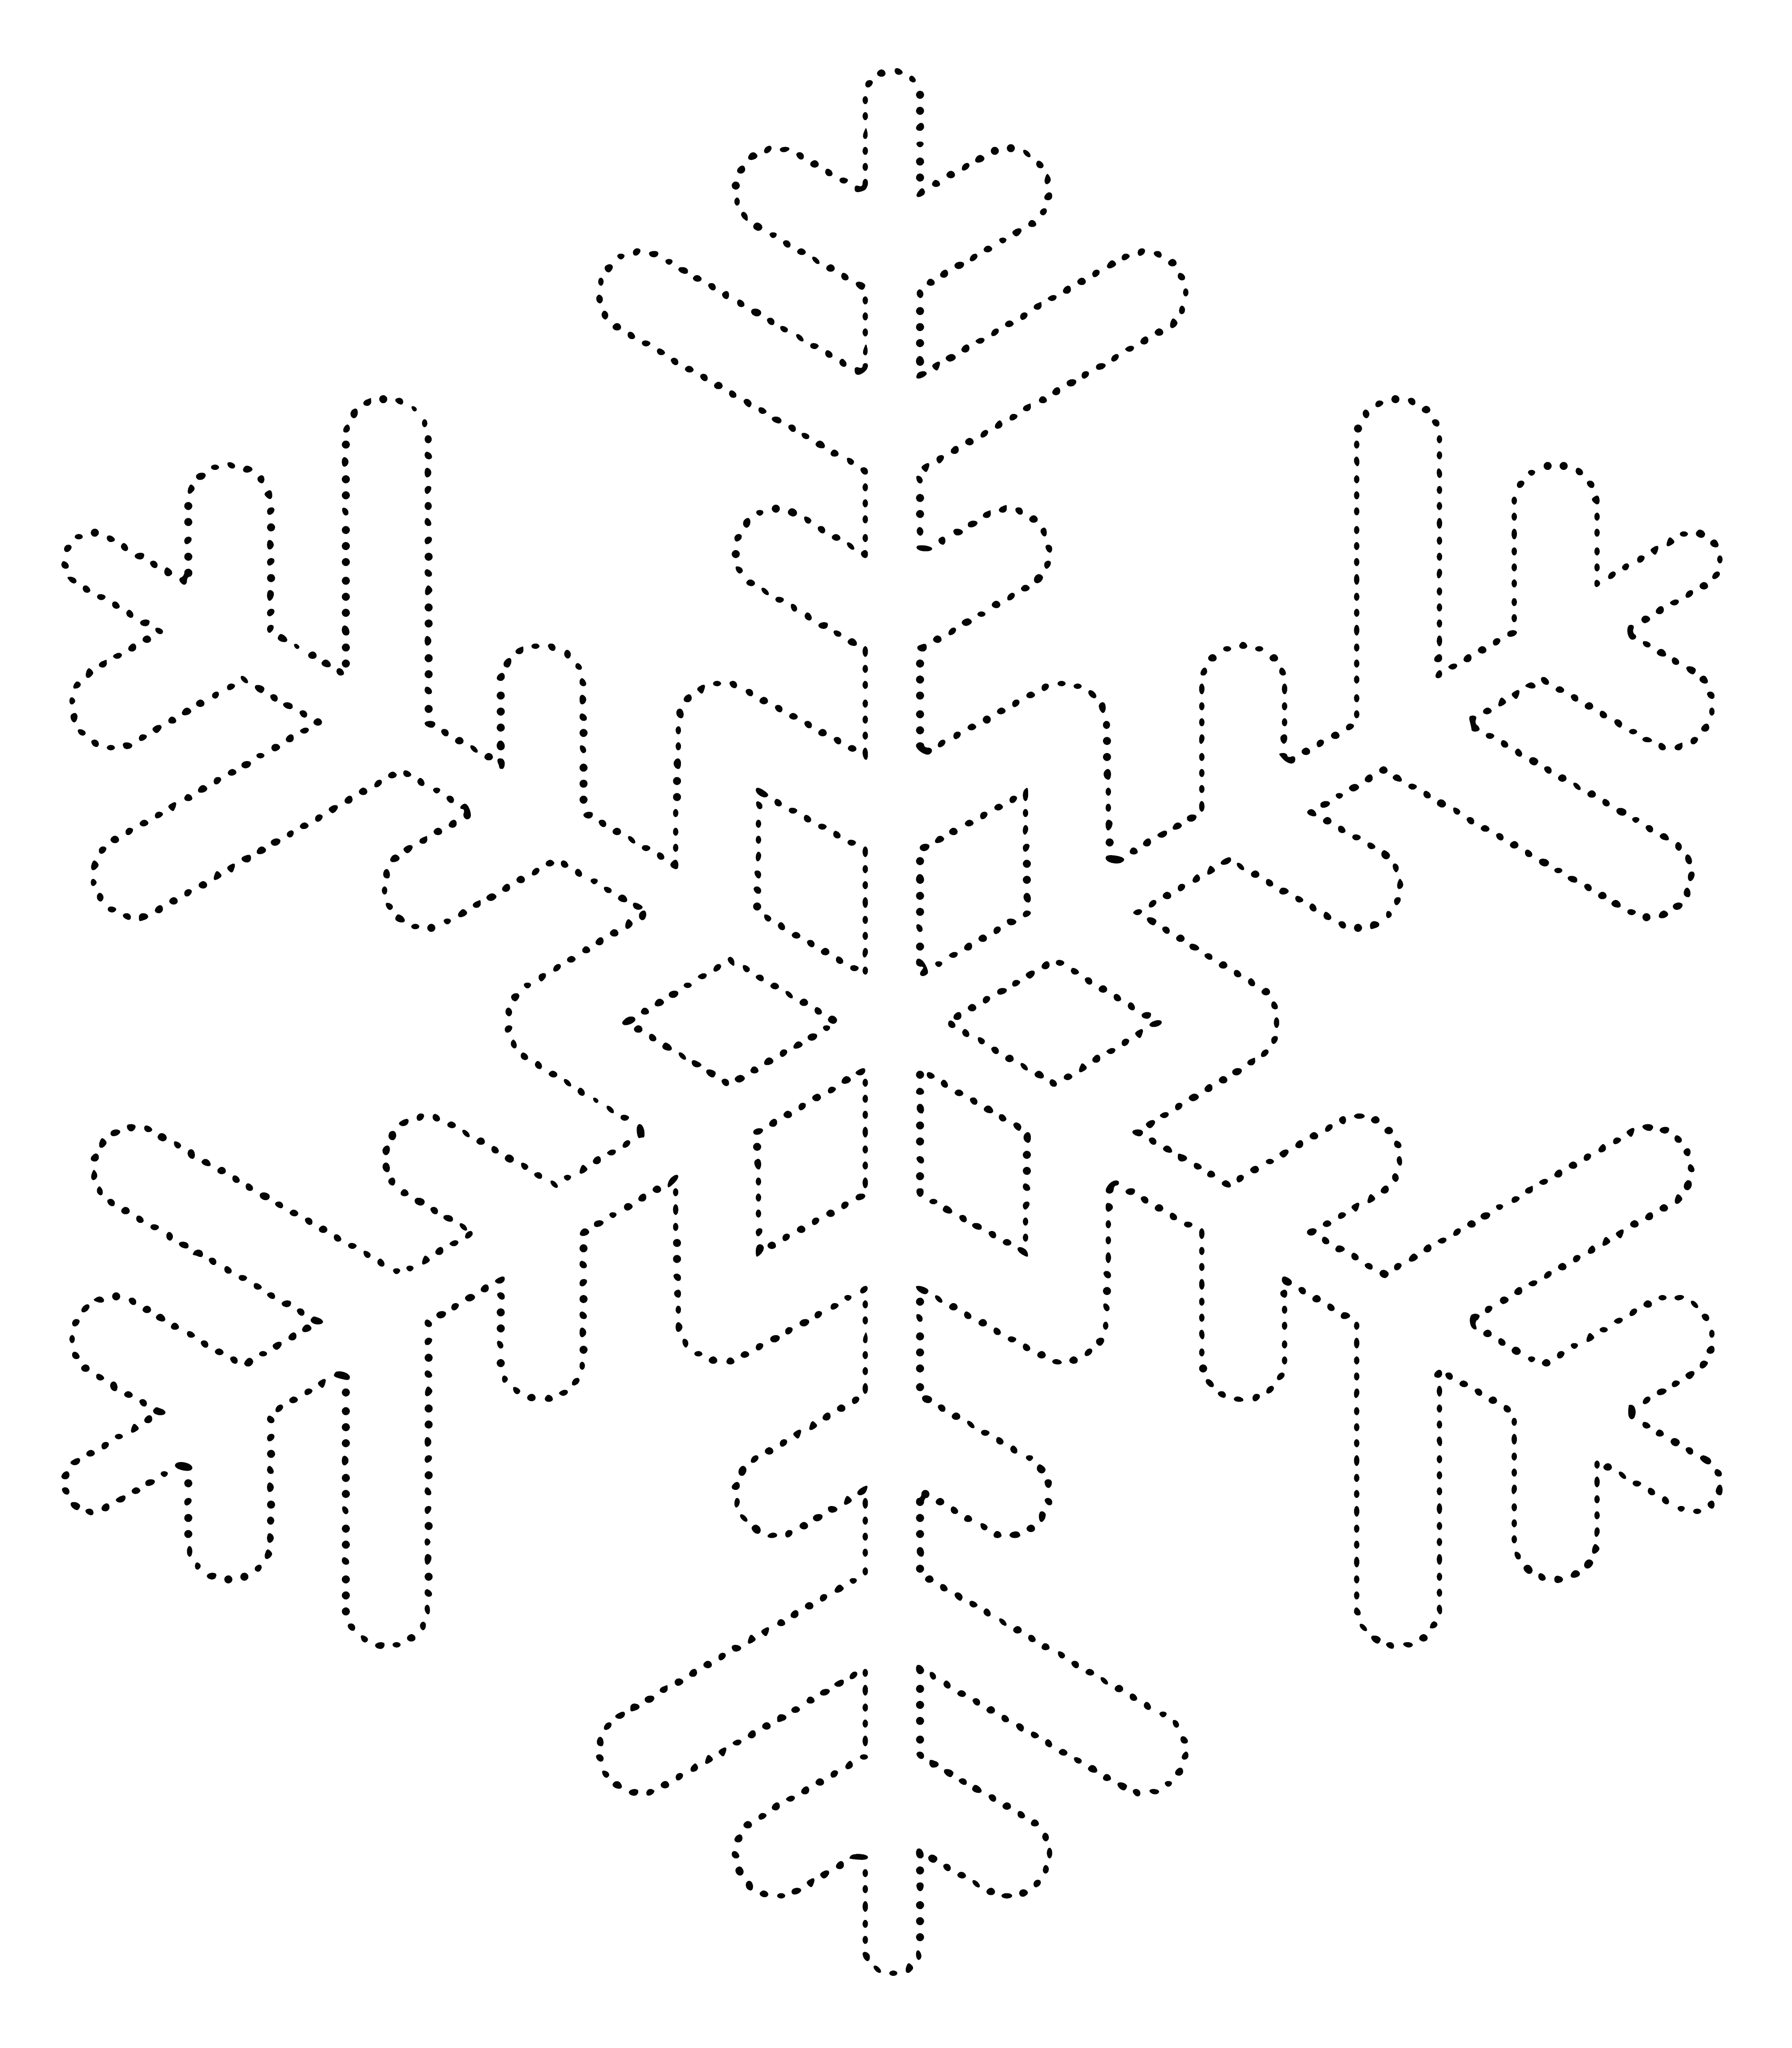 56 dots connect to form lines producing a snowflake outline. #snowflake